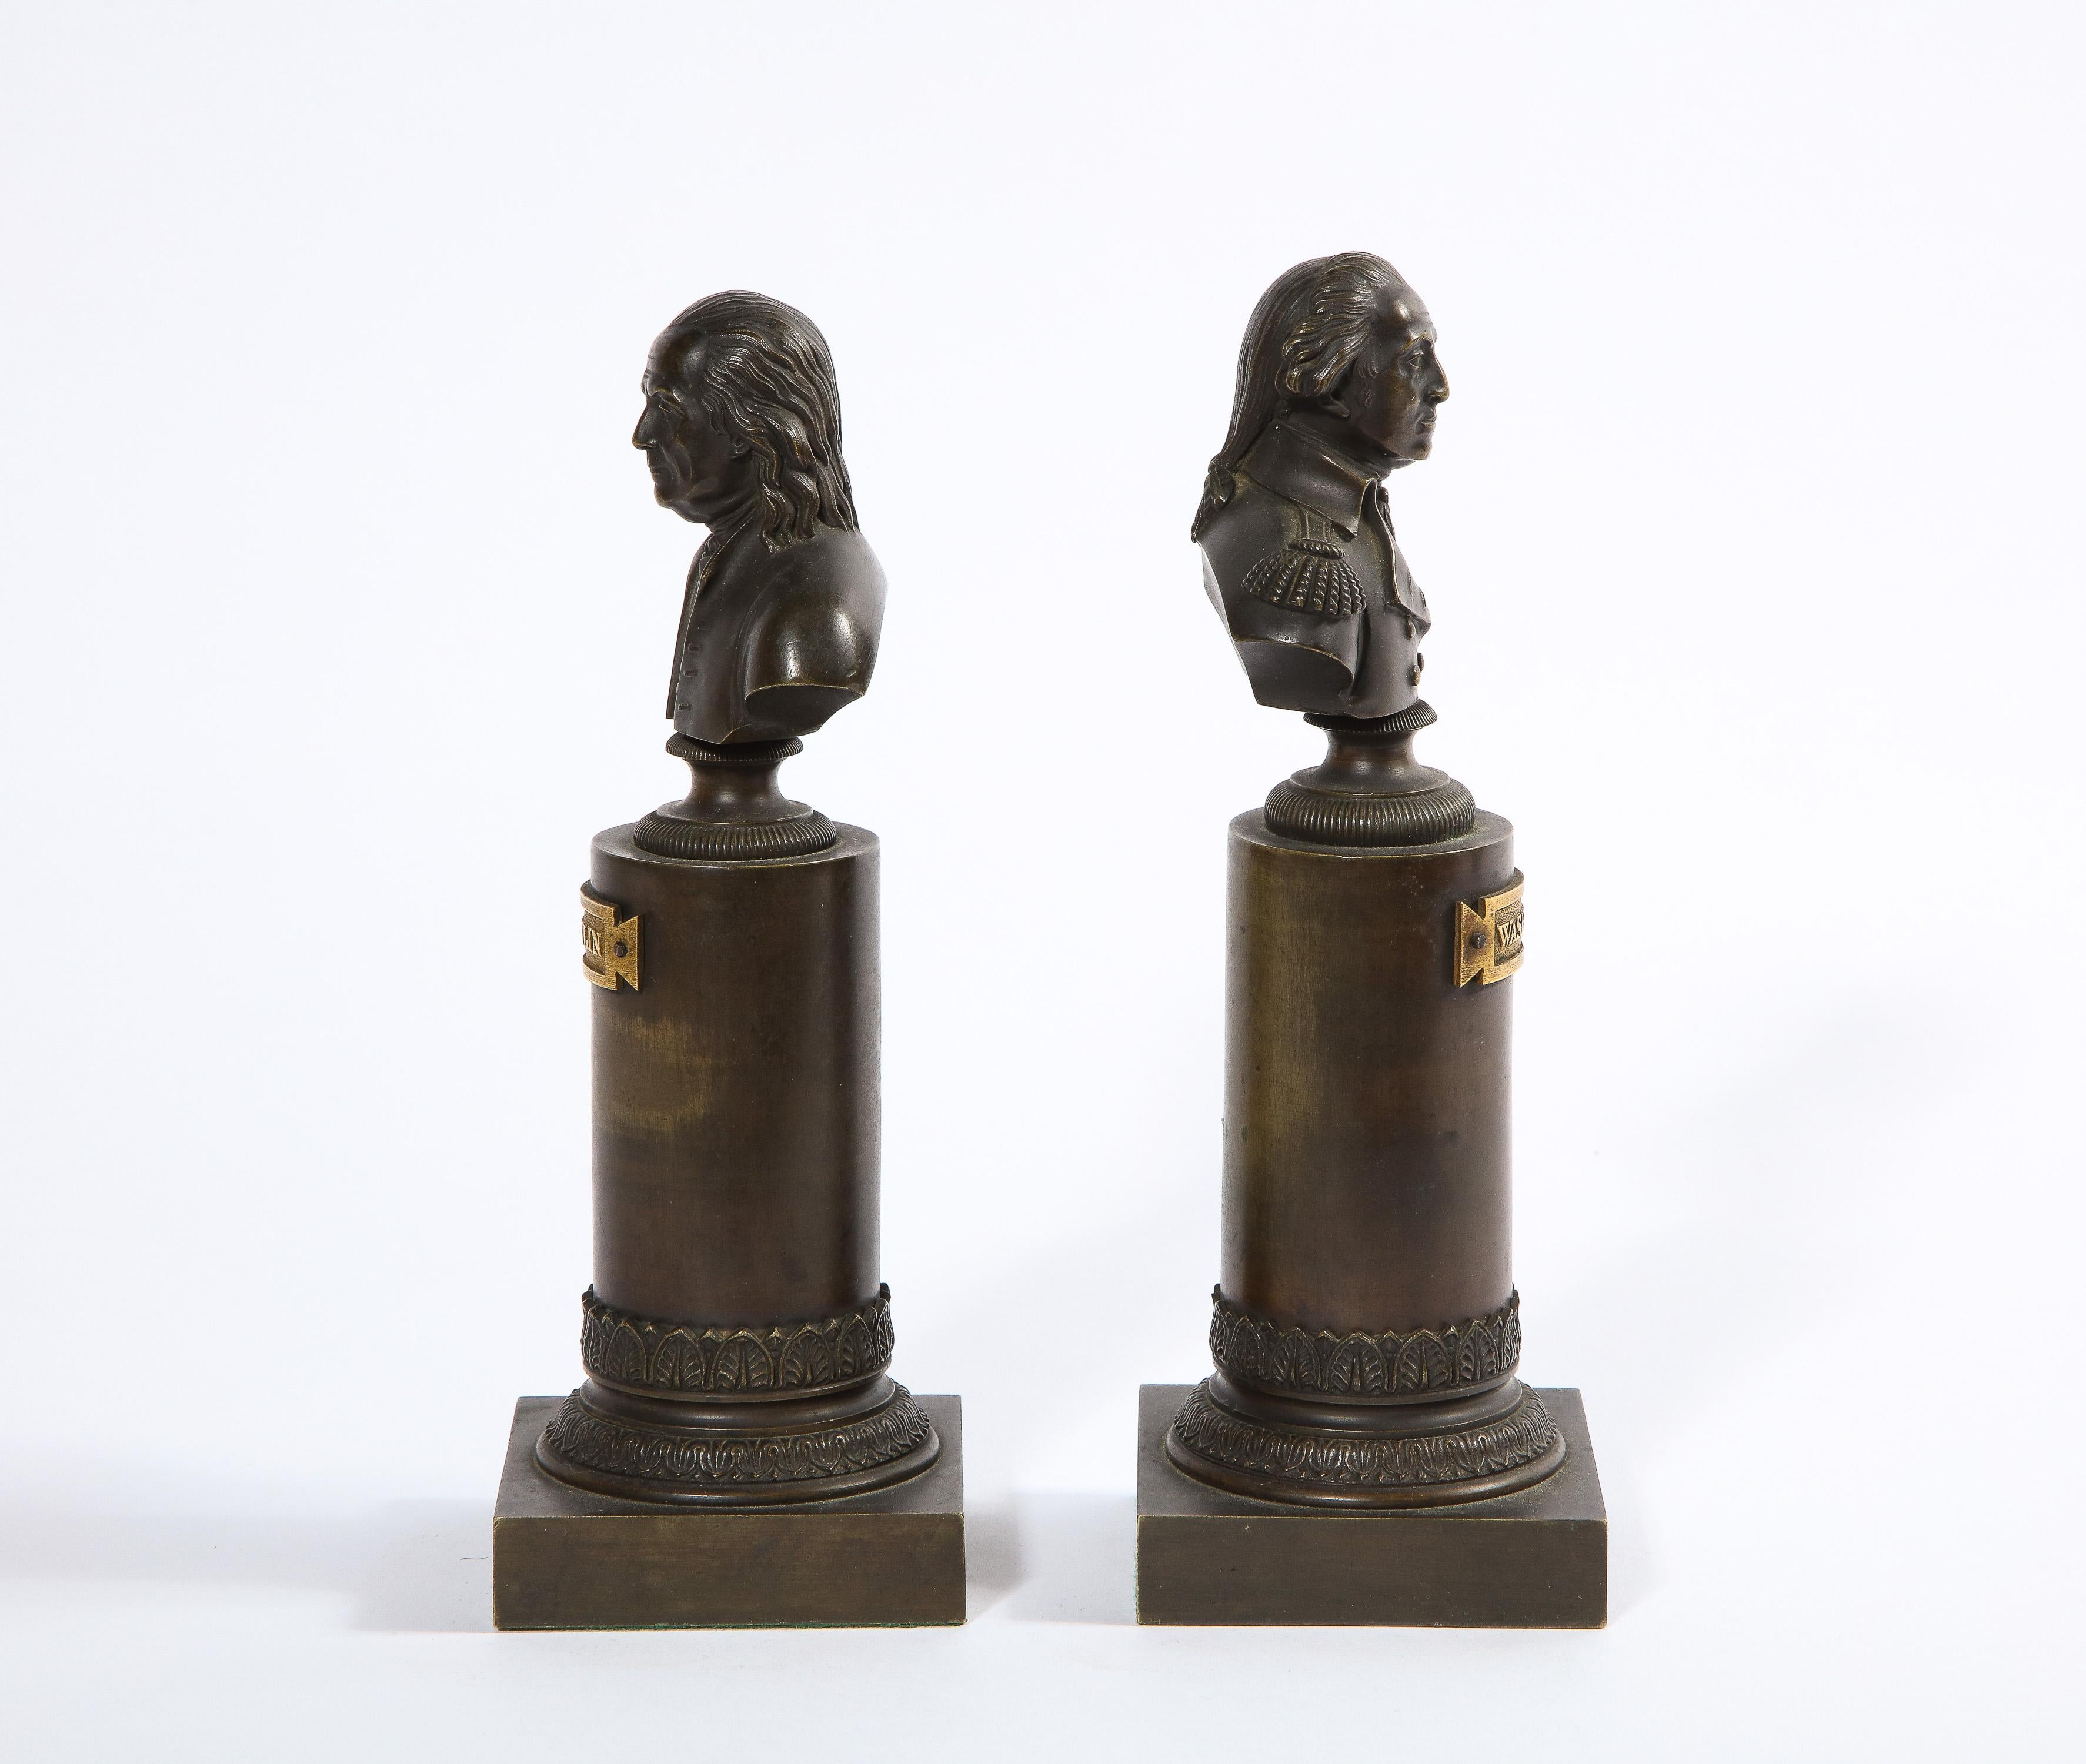 Rare Pair of American Bronze Busts of George Washington and Benjamin Franklin 1